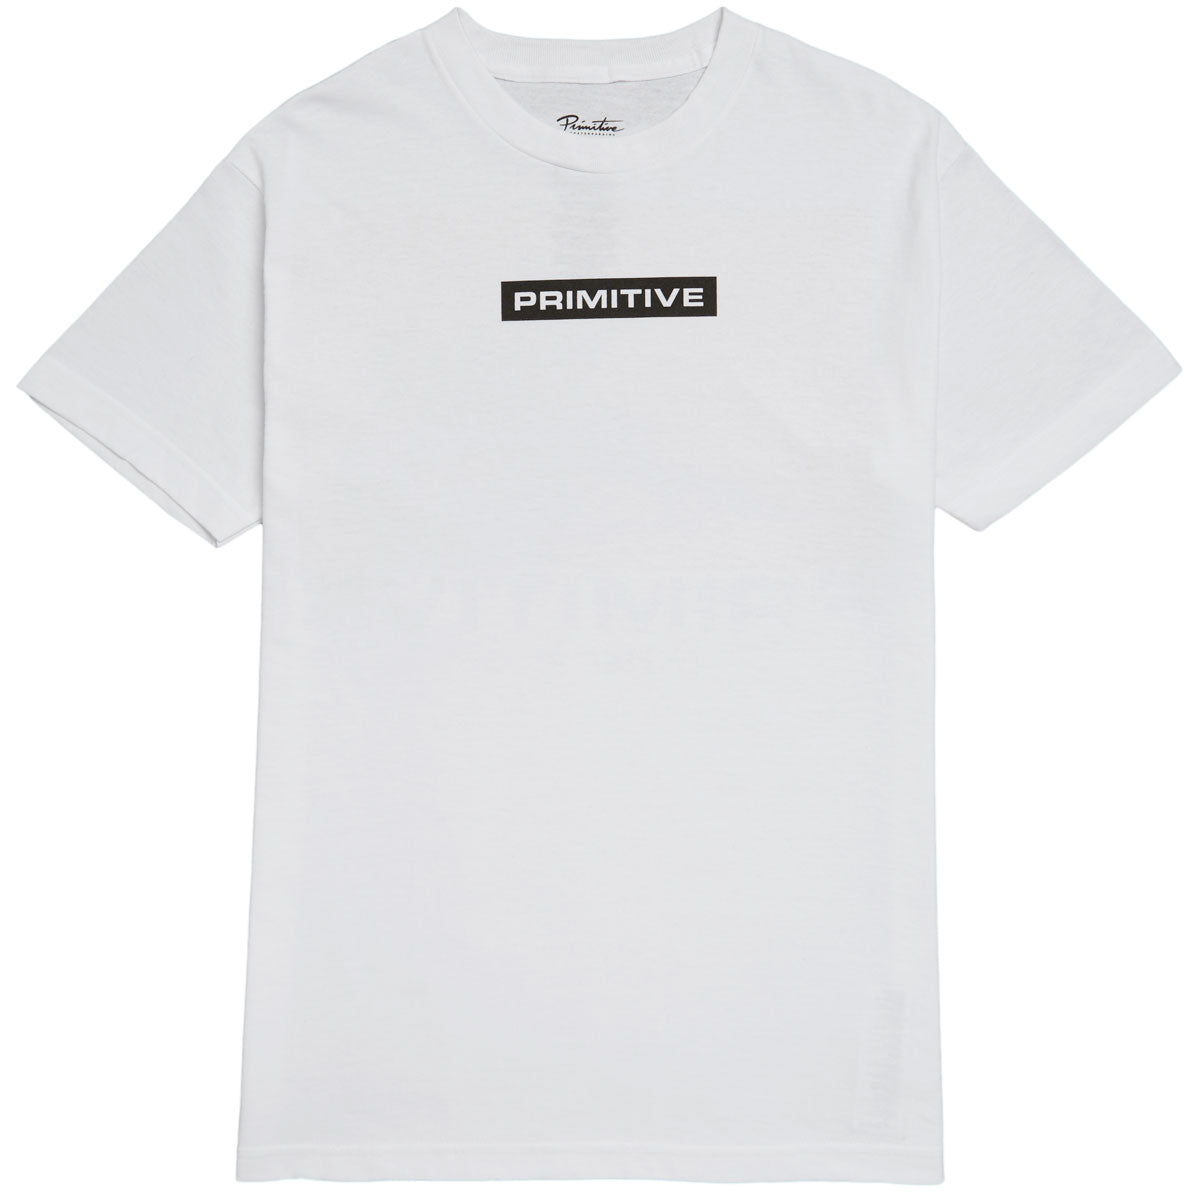 Primitive x Call Of Duty Alpha T-Shirt - White image 3